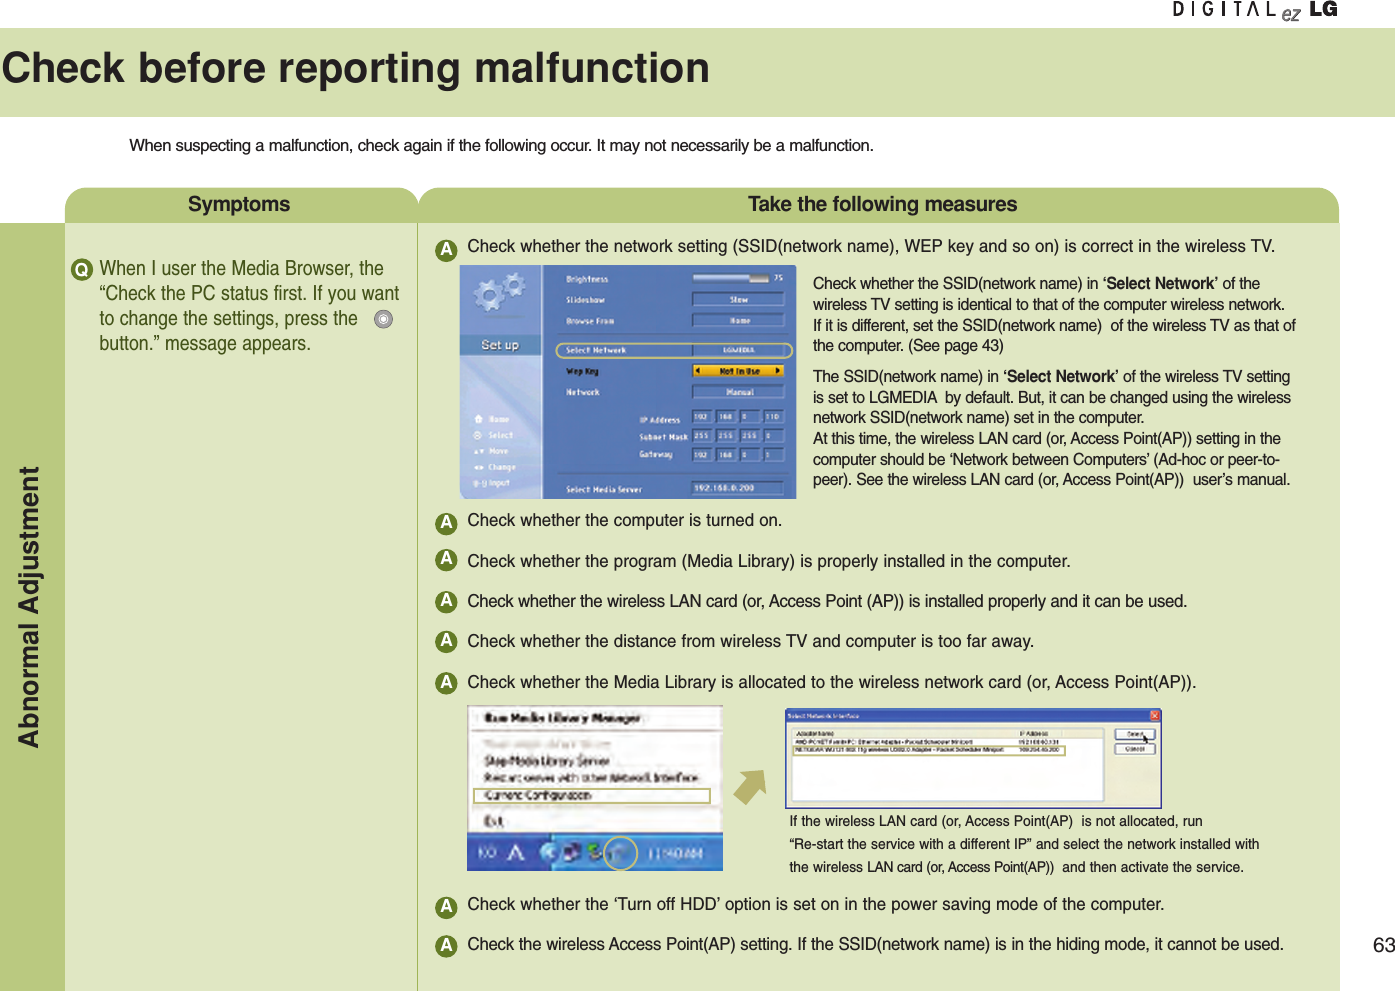 63Check before reporting malfunctionWhen suspecting a malfunction, check again if the following occur. It may not necessarily be a malfunction.Symptoms  Take the following measuresWhen I user the Media Browser, the“Check the PC status first. If you wantto change the settings, press thebutton.” message appears.Check whether the network setting (SSID(network name), WEP key and so on) is correct in the wireless TV.Check whether the computer is turned on.Check whether the program (Media Library) is properly installed in the computer.Check whether the wireless LAN card (or, Access Point (AP)) is installed properly and it can be used.Check whether the distance from wireless TV and computer is too far away.Check whether the Media Library is allocated to the wireless network card (or, Access Point(AP)).Check whether the ‘Turn off HDD’option is set on in the power saving mode of the computer.Check the wireless Access Point(AP) setting. If the SSID(network name) is in the hiding mode, it cannot be used.Q AAAAAAAACheck whether the SSID(network name) in ‘Select Network’of thewireless TV setting is identical to that of the computer wireless network.If it is different, set the SSID(network name)  of the wireless TV as that ofthe computer. (See page 43)The SSID(network name) in ‘Select Network’of the wireless TV settingis set to LGMEDIA by default. But, it can be changed using the wirelessnetwork SSID(network name) set in the computer.At this time, the wireless LAN card (or, Access Point(AP)) setting in thecomputer should be ‘Network between Computers’(Ad-hoc or peer-to-peer). See the wireless LAN card (or, Access Point(AP))  user’s manual.If the wireless LAN card (or, Access Point(AP)  is not allocated, run “Re-start the service with a different IP” and select the network installed withthe wireless LAN card (or, Access Point(AP)) and then activate the service.Abnormal Adjustment